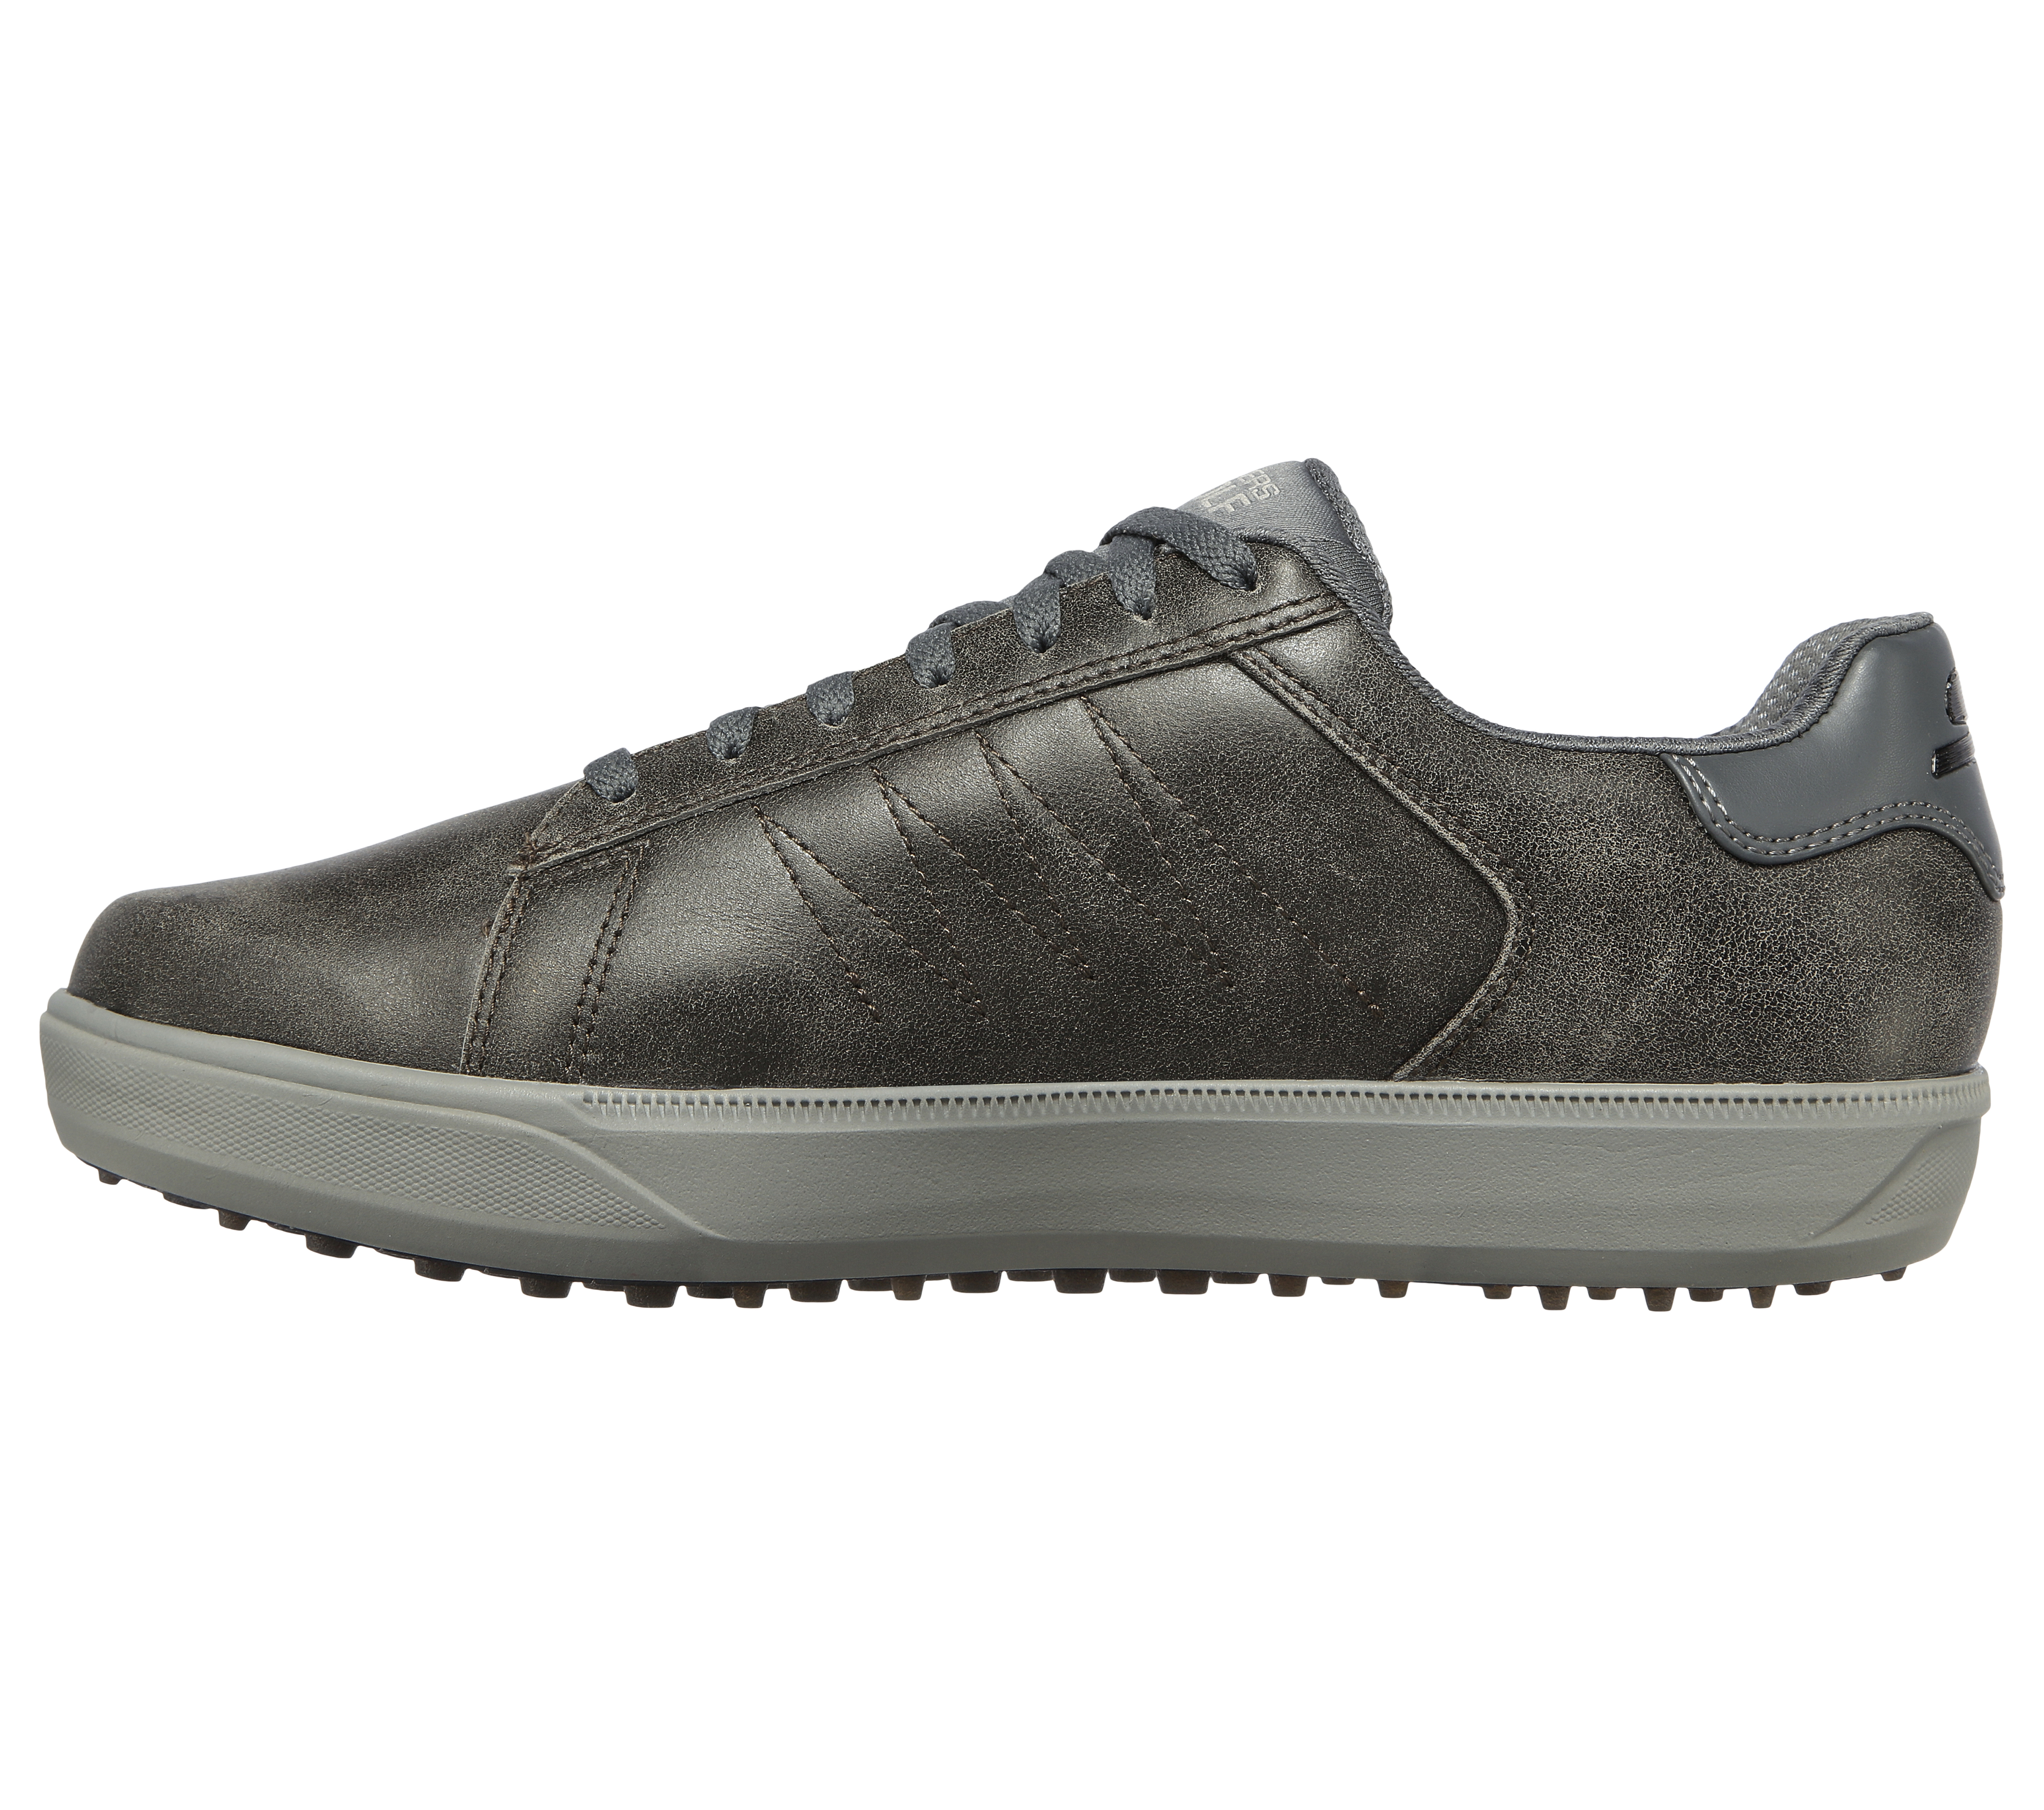 Shop the Relaxed Fit: Skechers GO Drive 4 LX Plus | SKECHERS